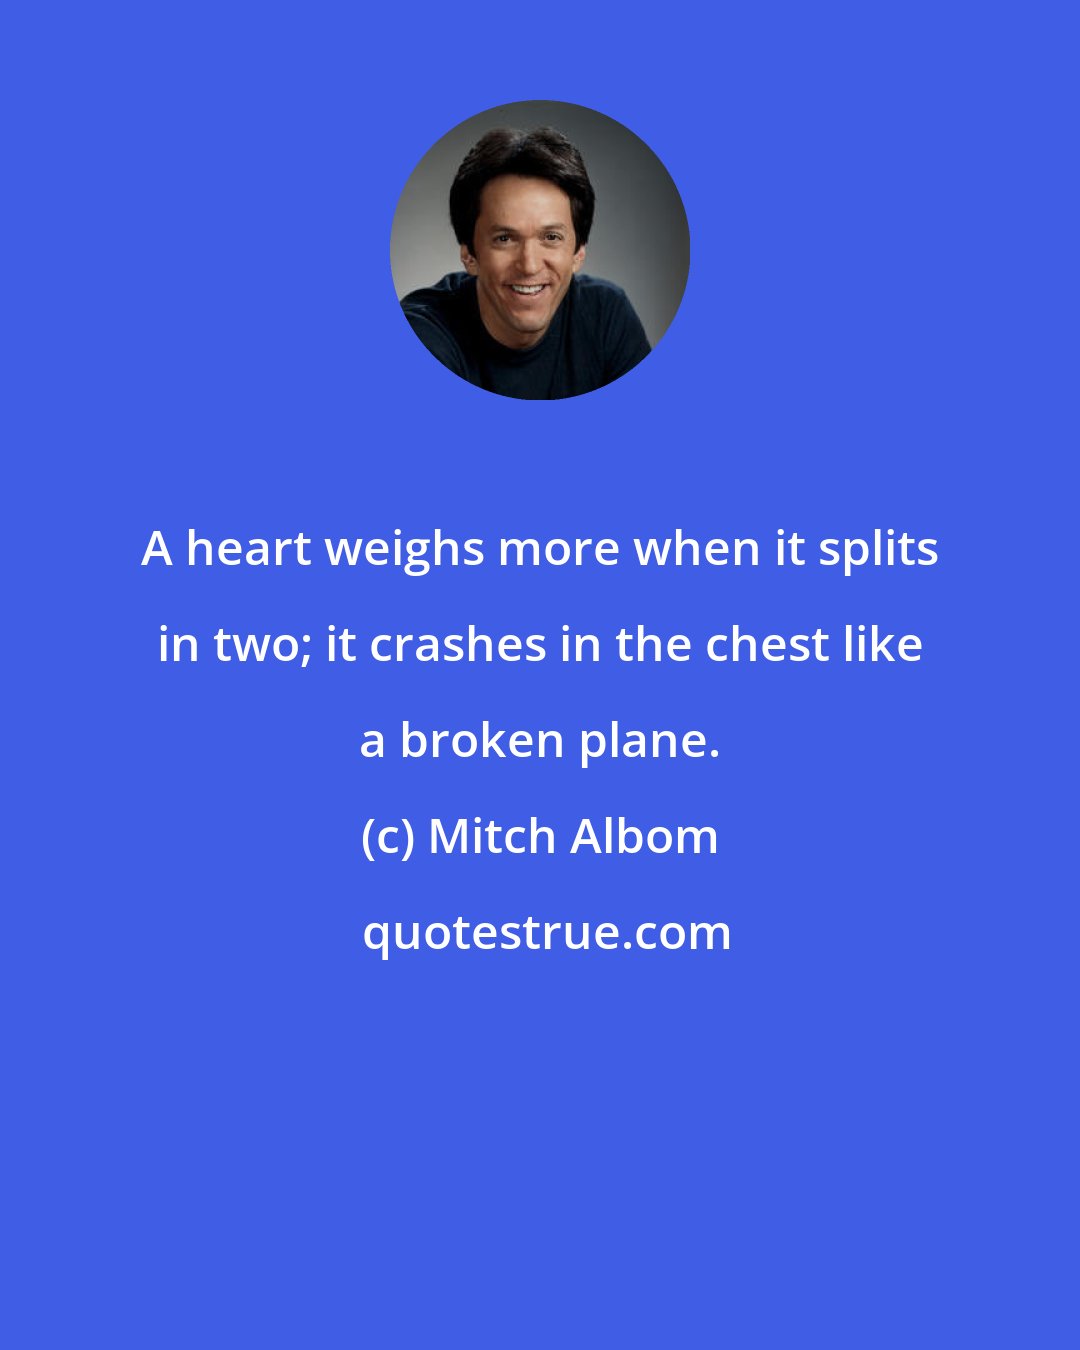 Mitch Albom: A heart weighs more when it splits in two; it crashes in the chest like a broken plane.